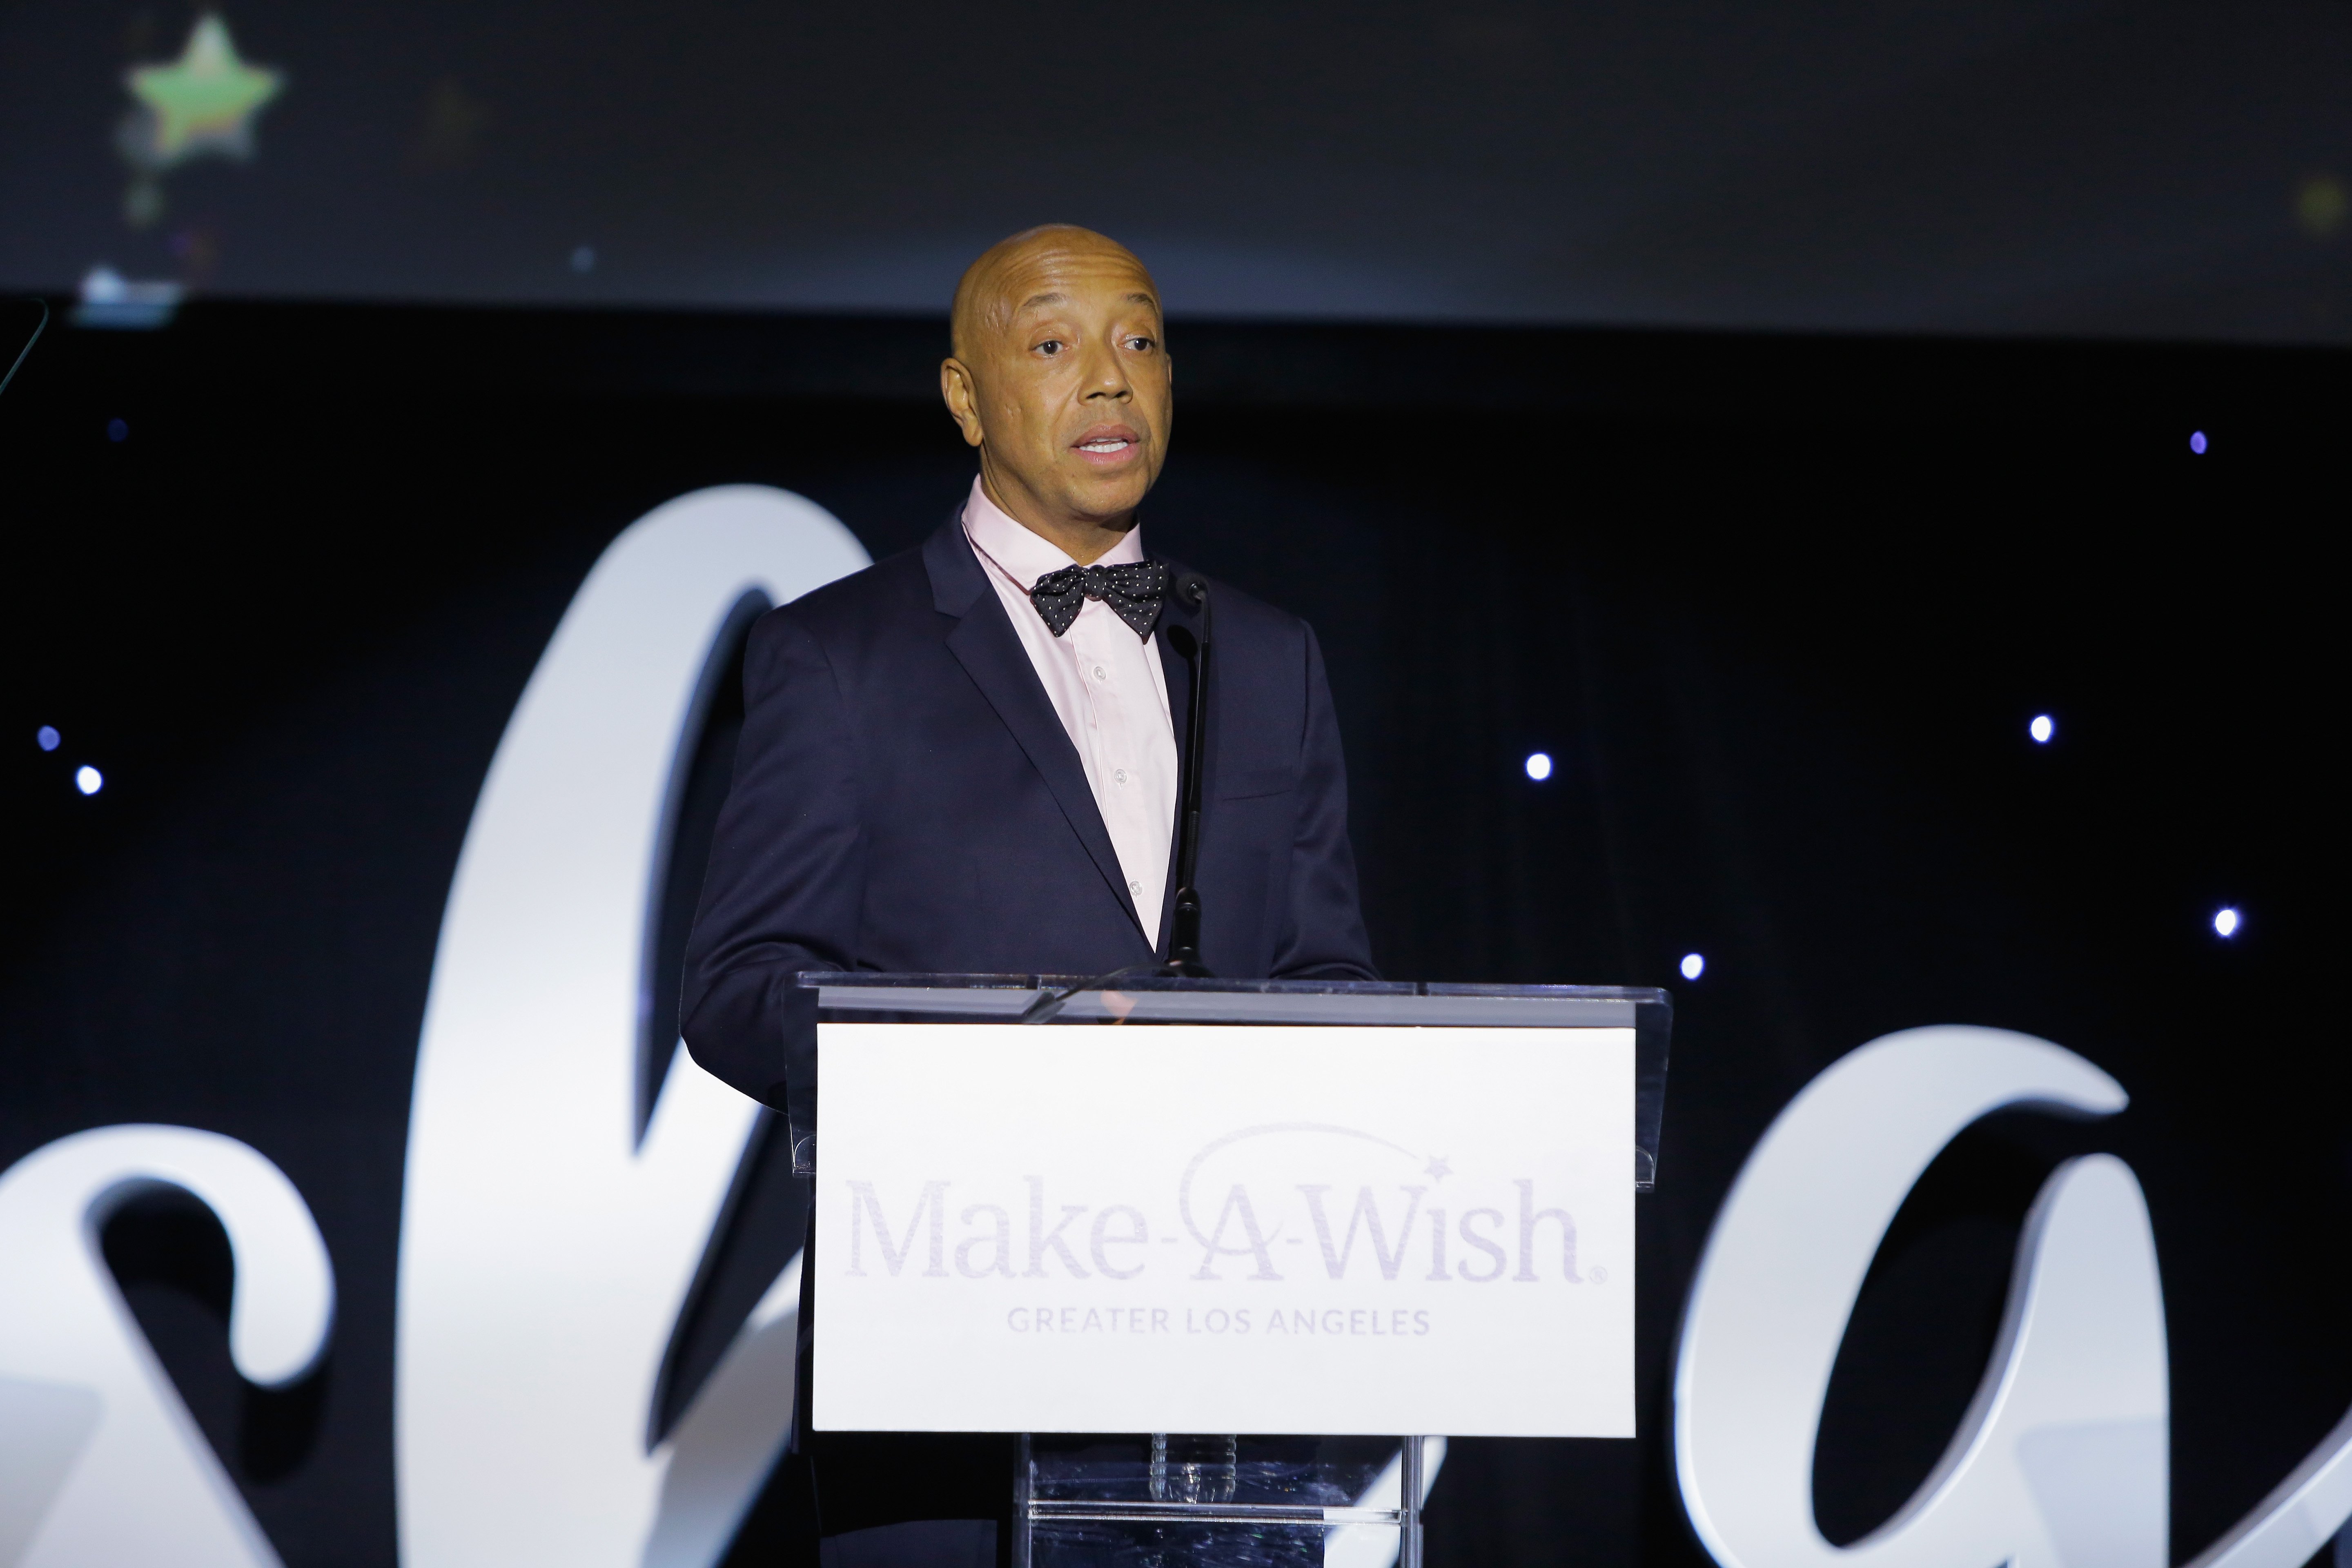 Russell Simmons at the 2017 Make a Wish Gala on Nov. 9, 2017 in California | Photo: Getty Images